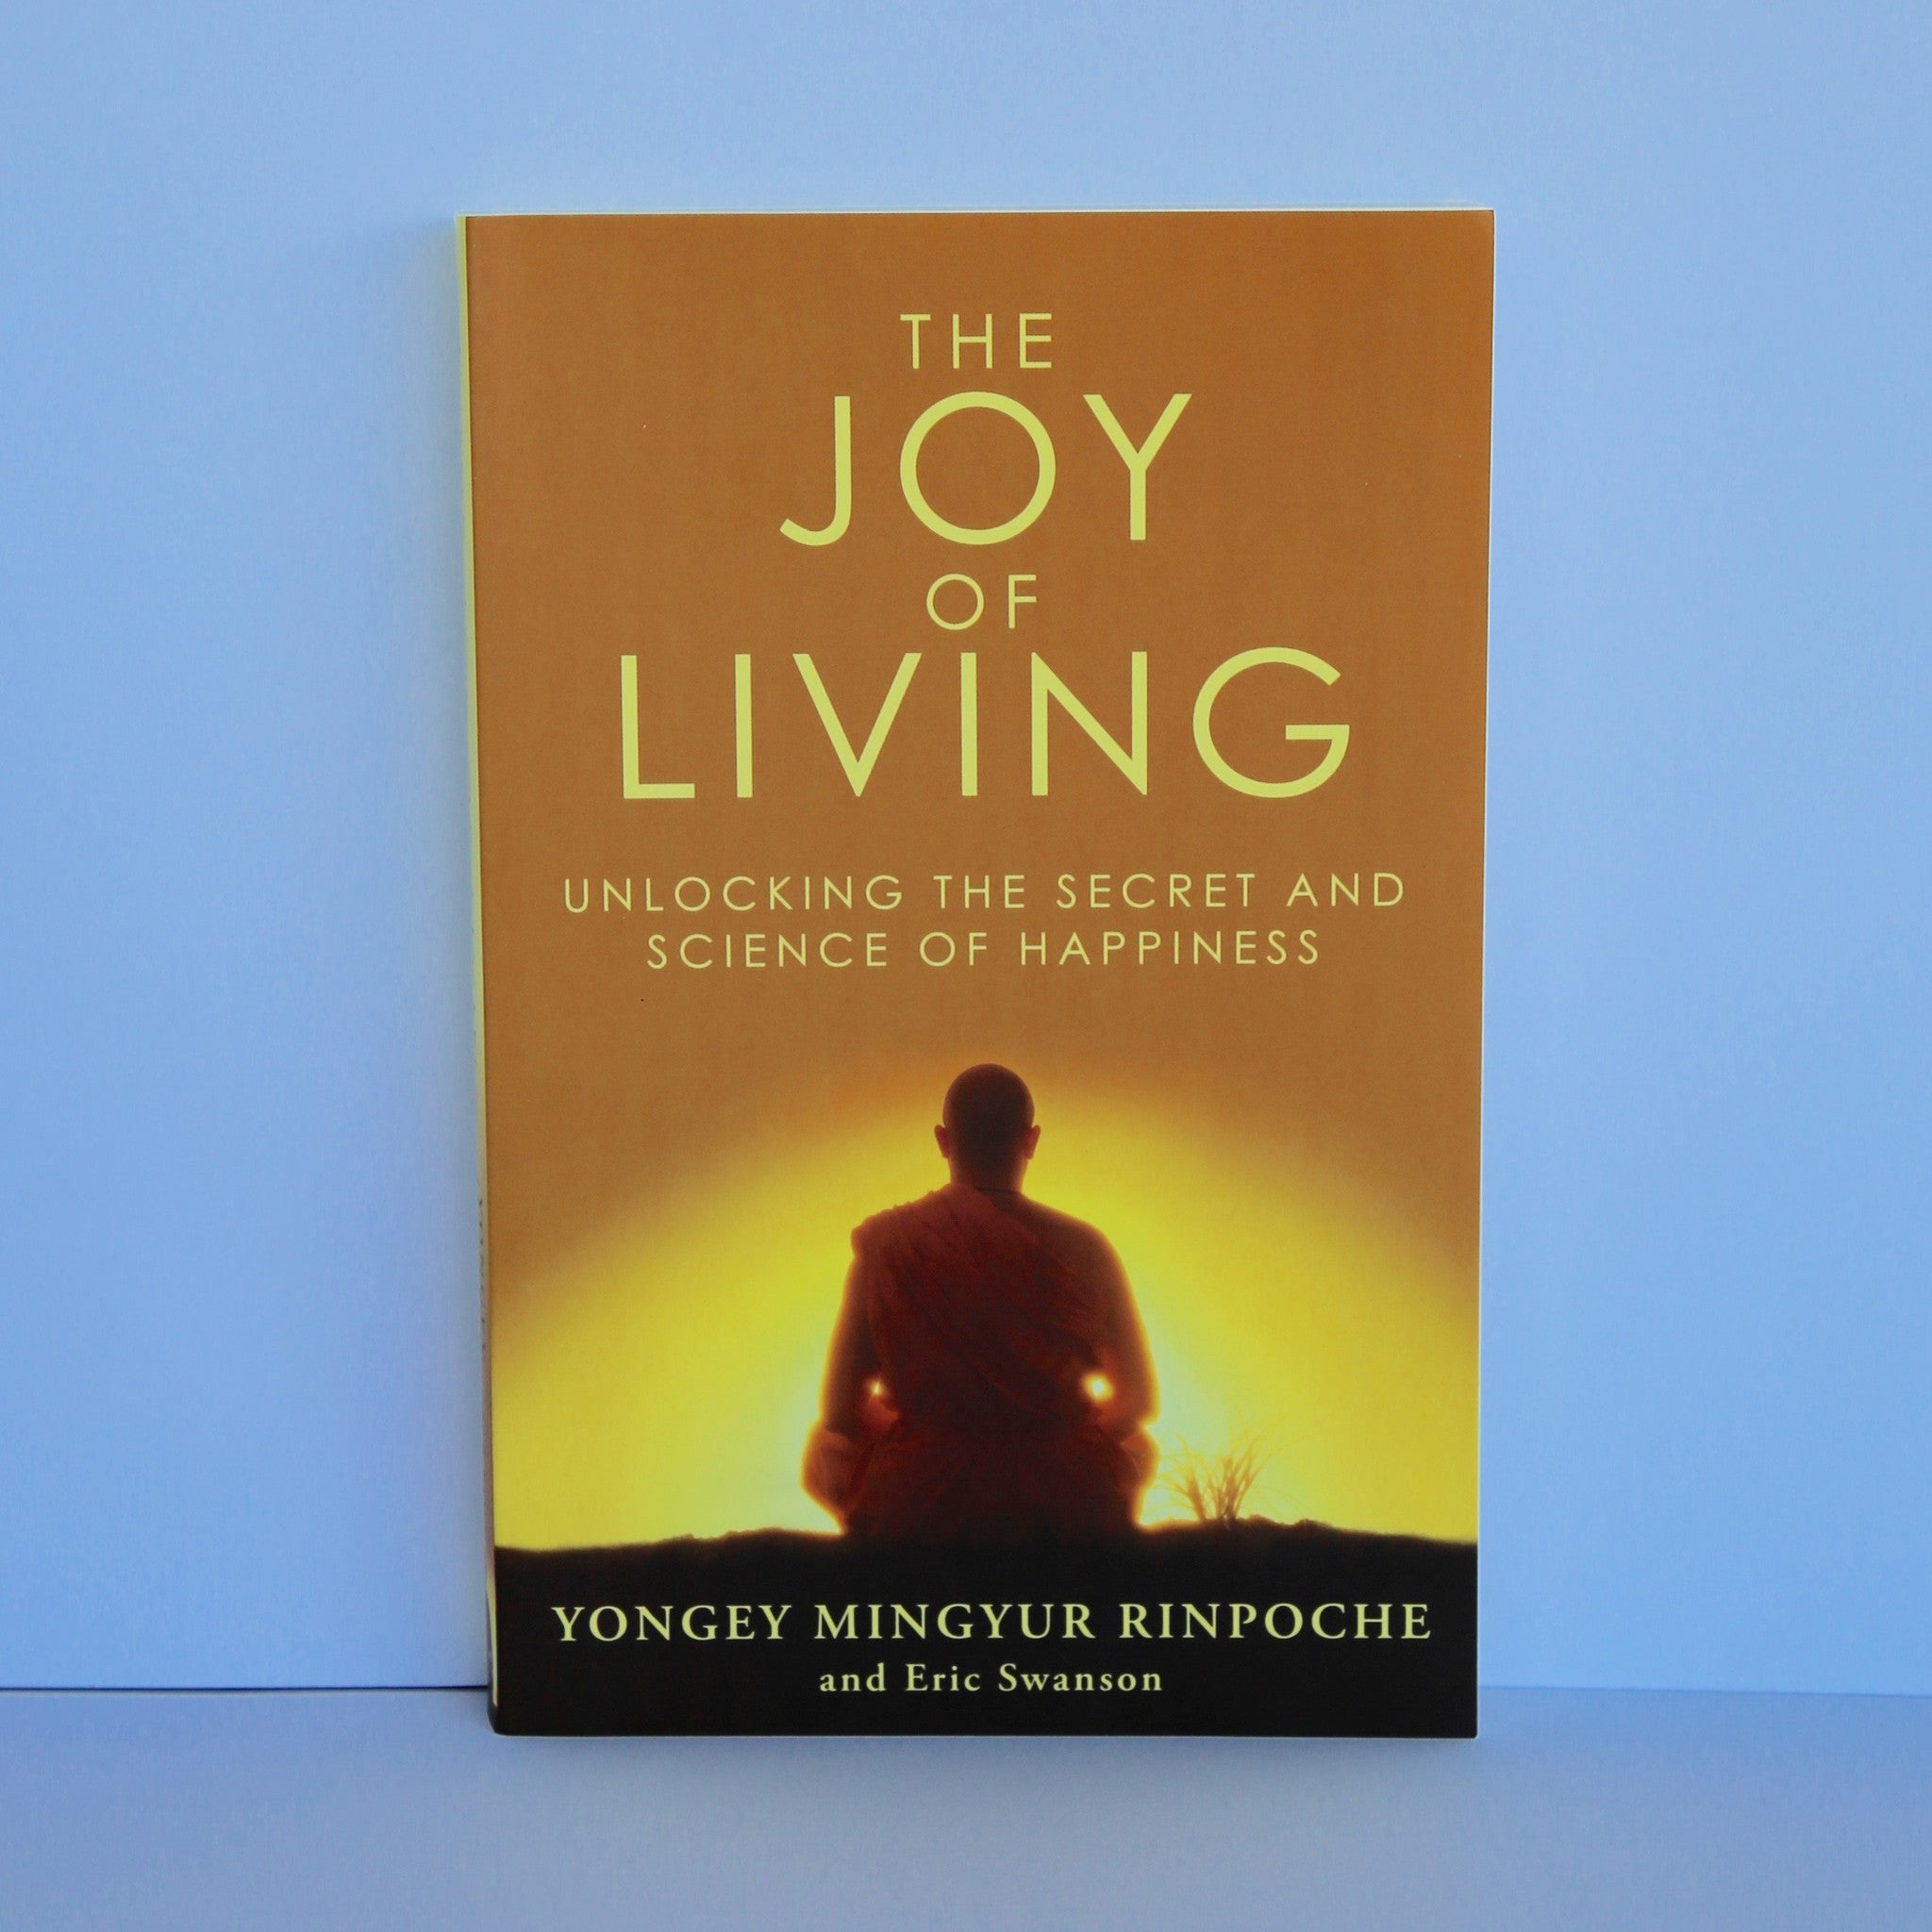 The Joy of Living - Unlocking the Secret and Science of Happiness by Yongey Mingyur Rinpoche and Eric Swanson